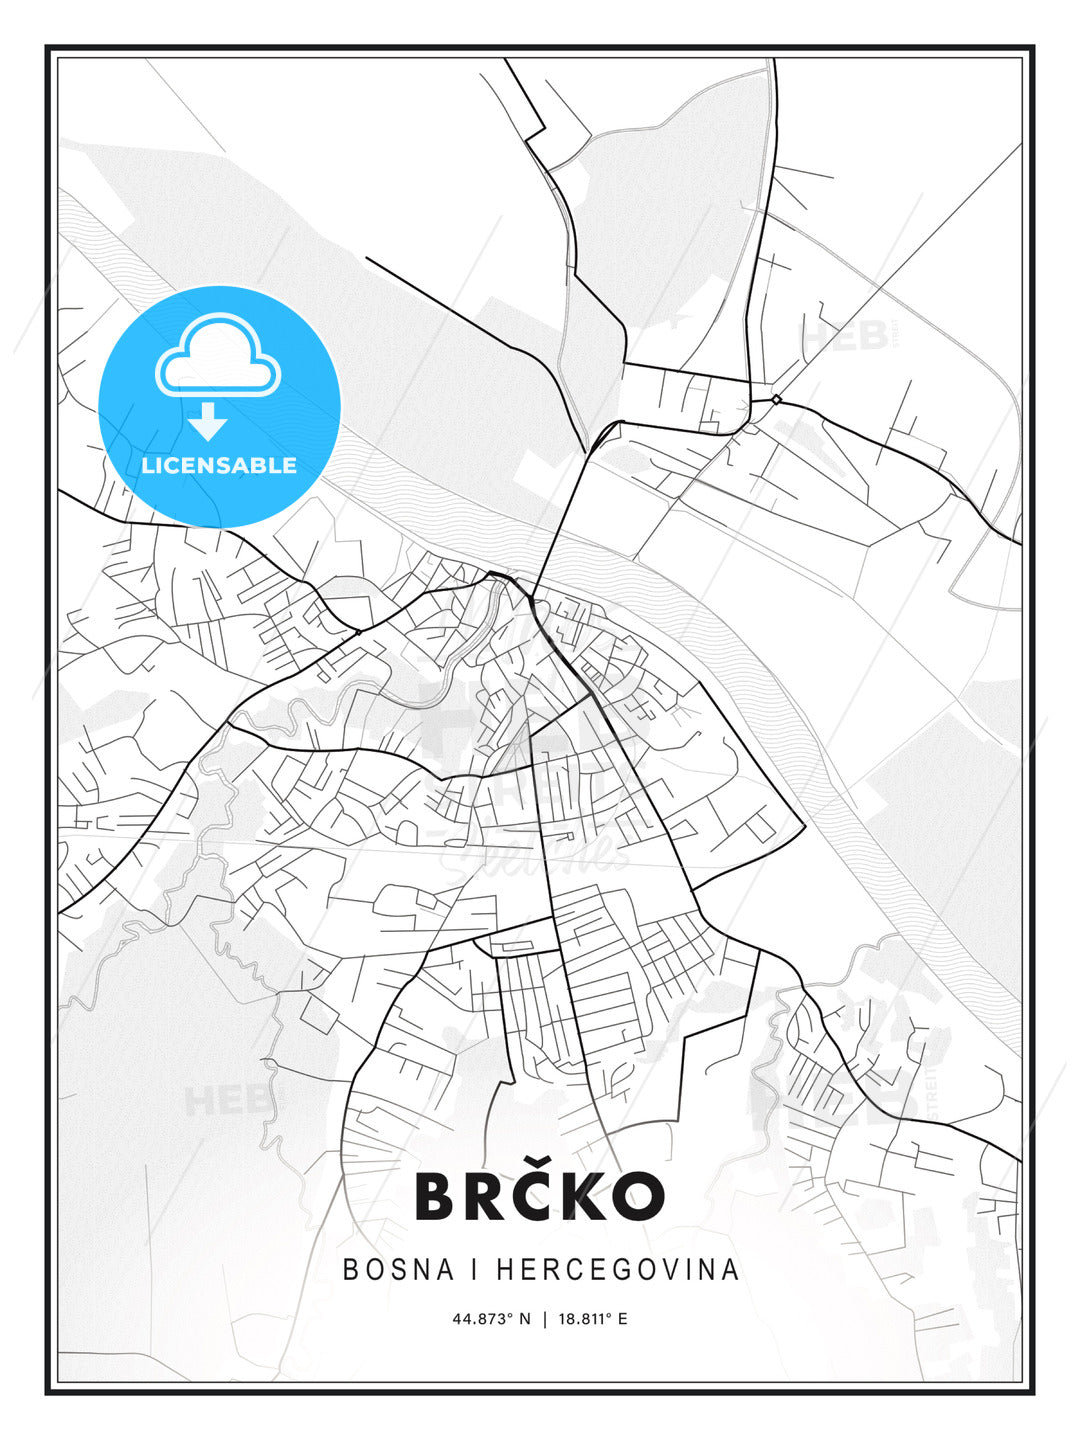 Brčko, Bosnia and Herzegovina, Modern Print Template in Various Formats - HEBSTREITS Sketches